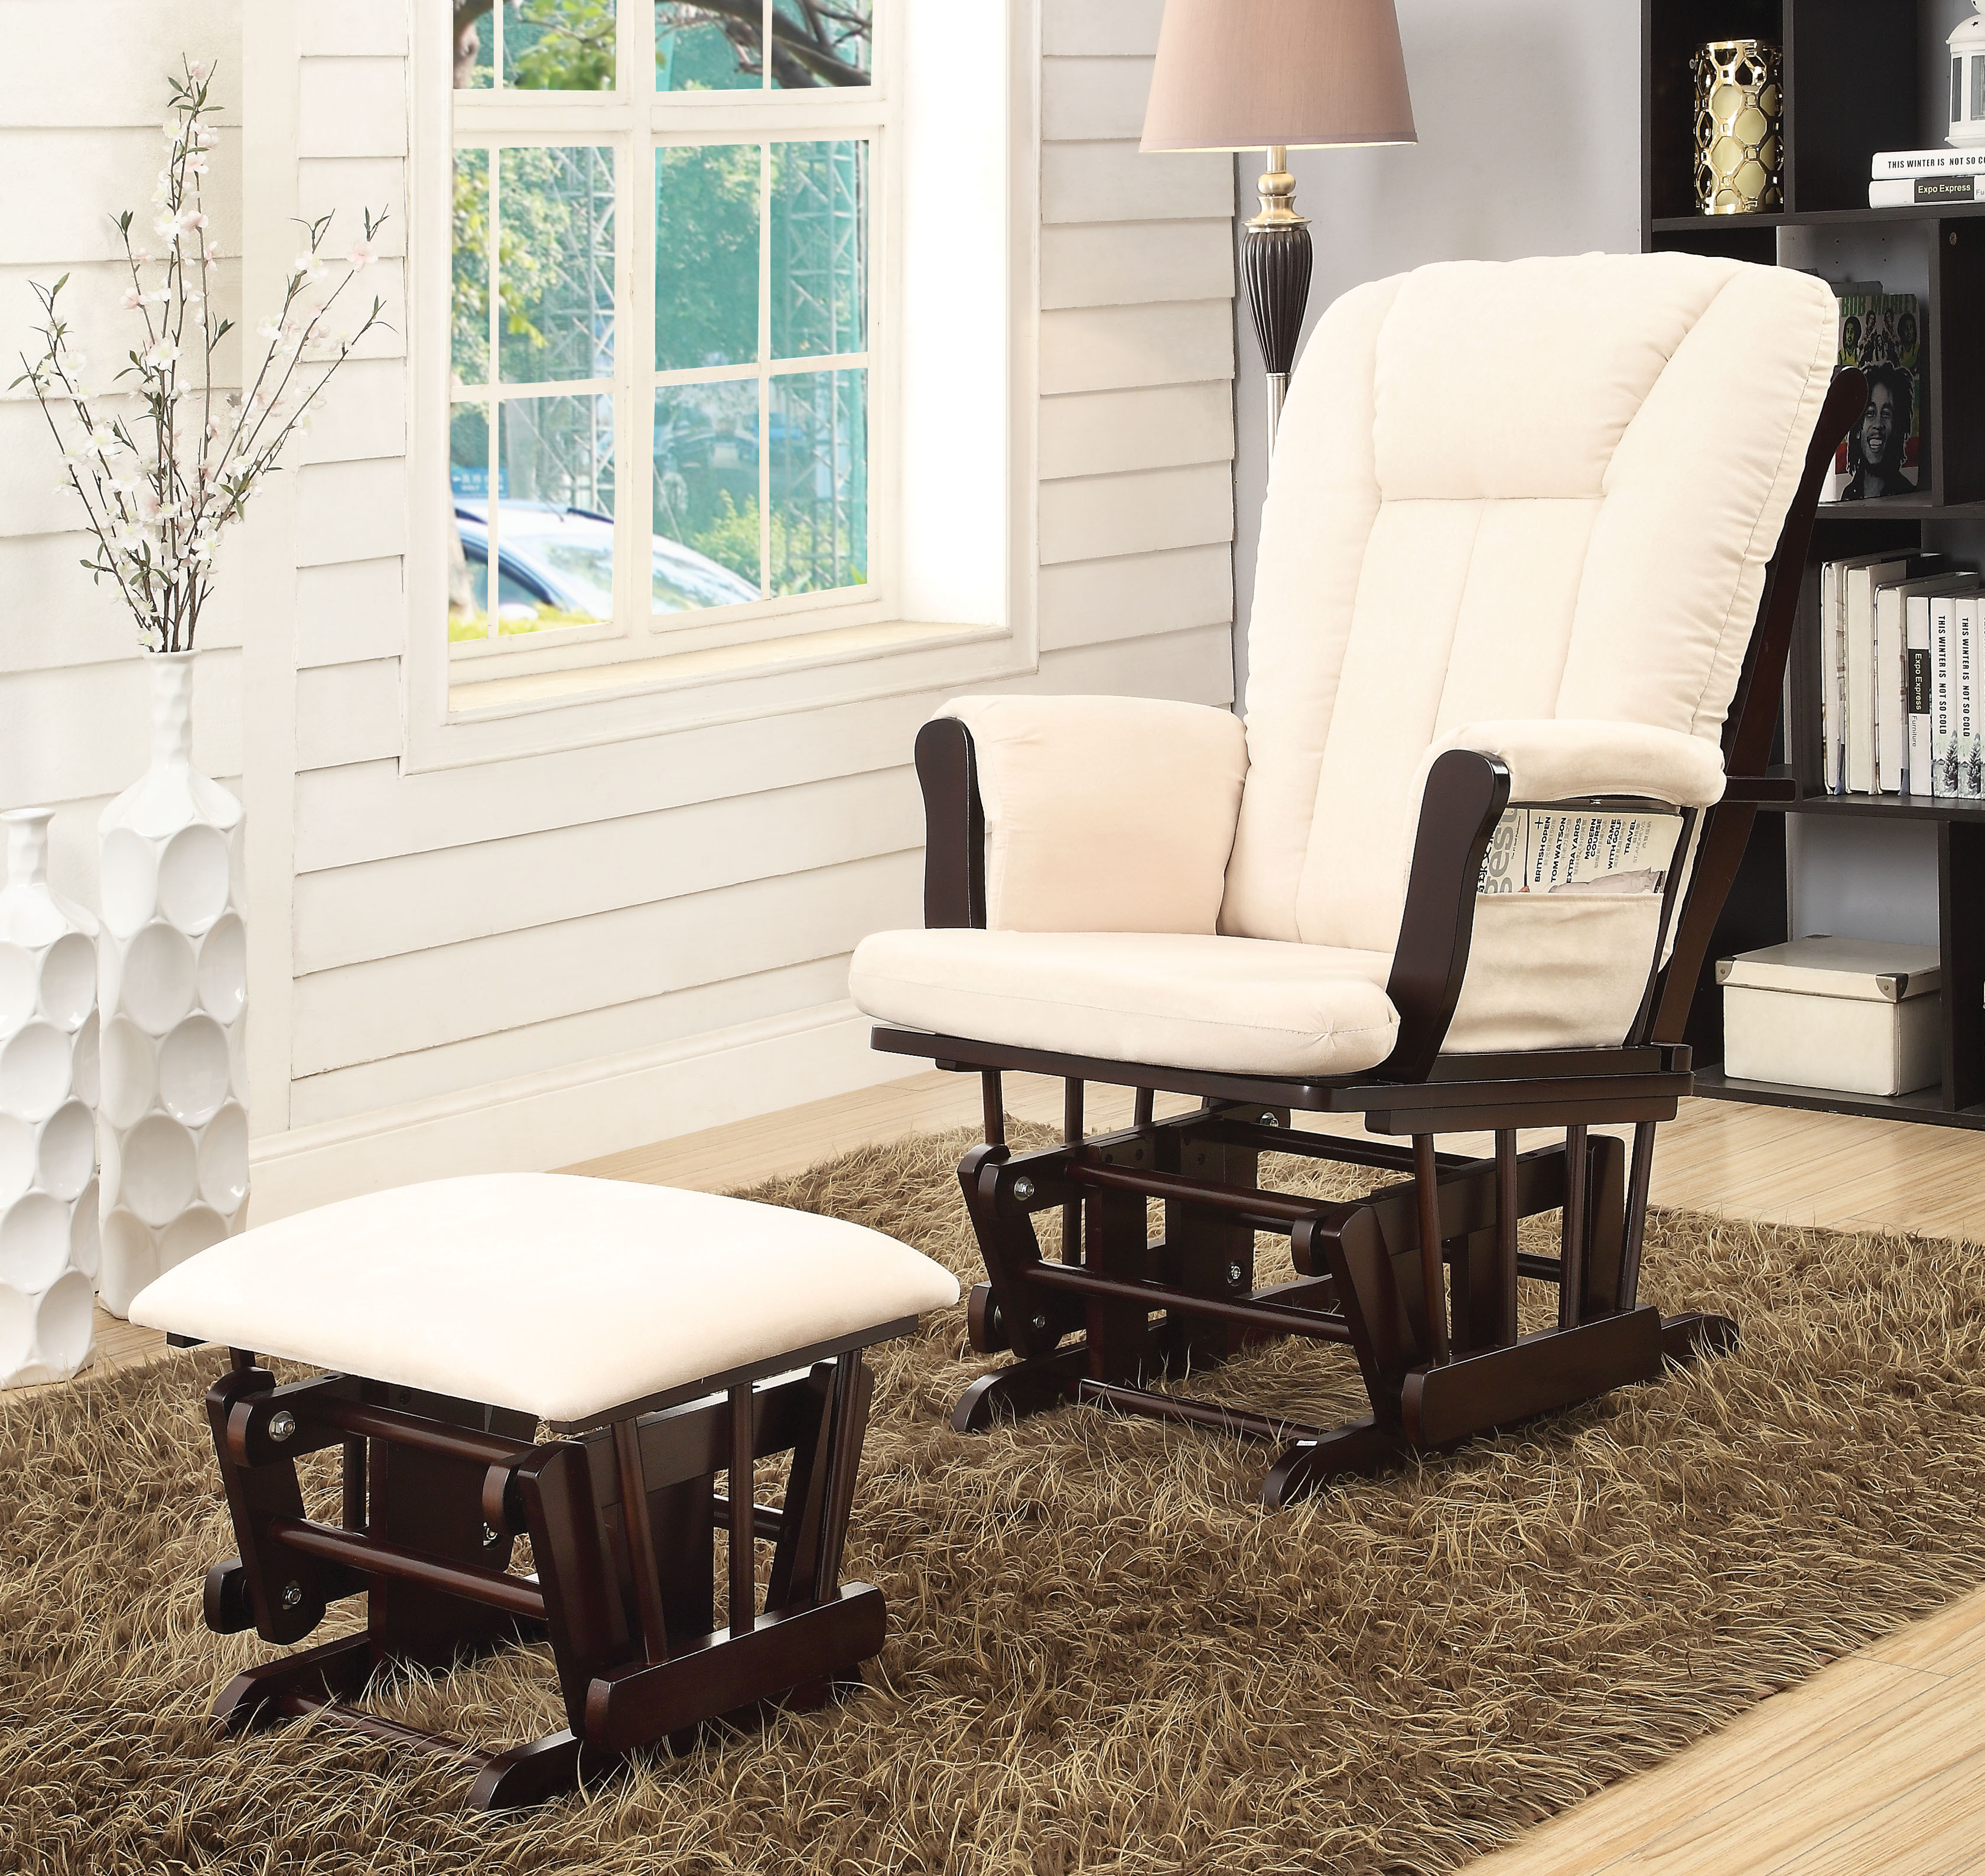 Acme Paola 2Pc Pack Glider Chair & Ottoman, Beige Microfiber & Espresso-Finish:Beige Mfb & Espresso,Style:Transitional - image 2 of 2